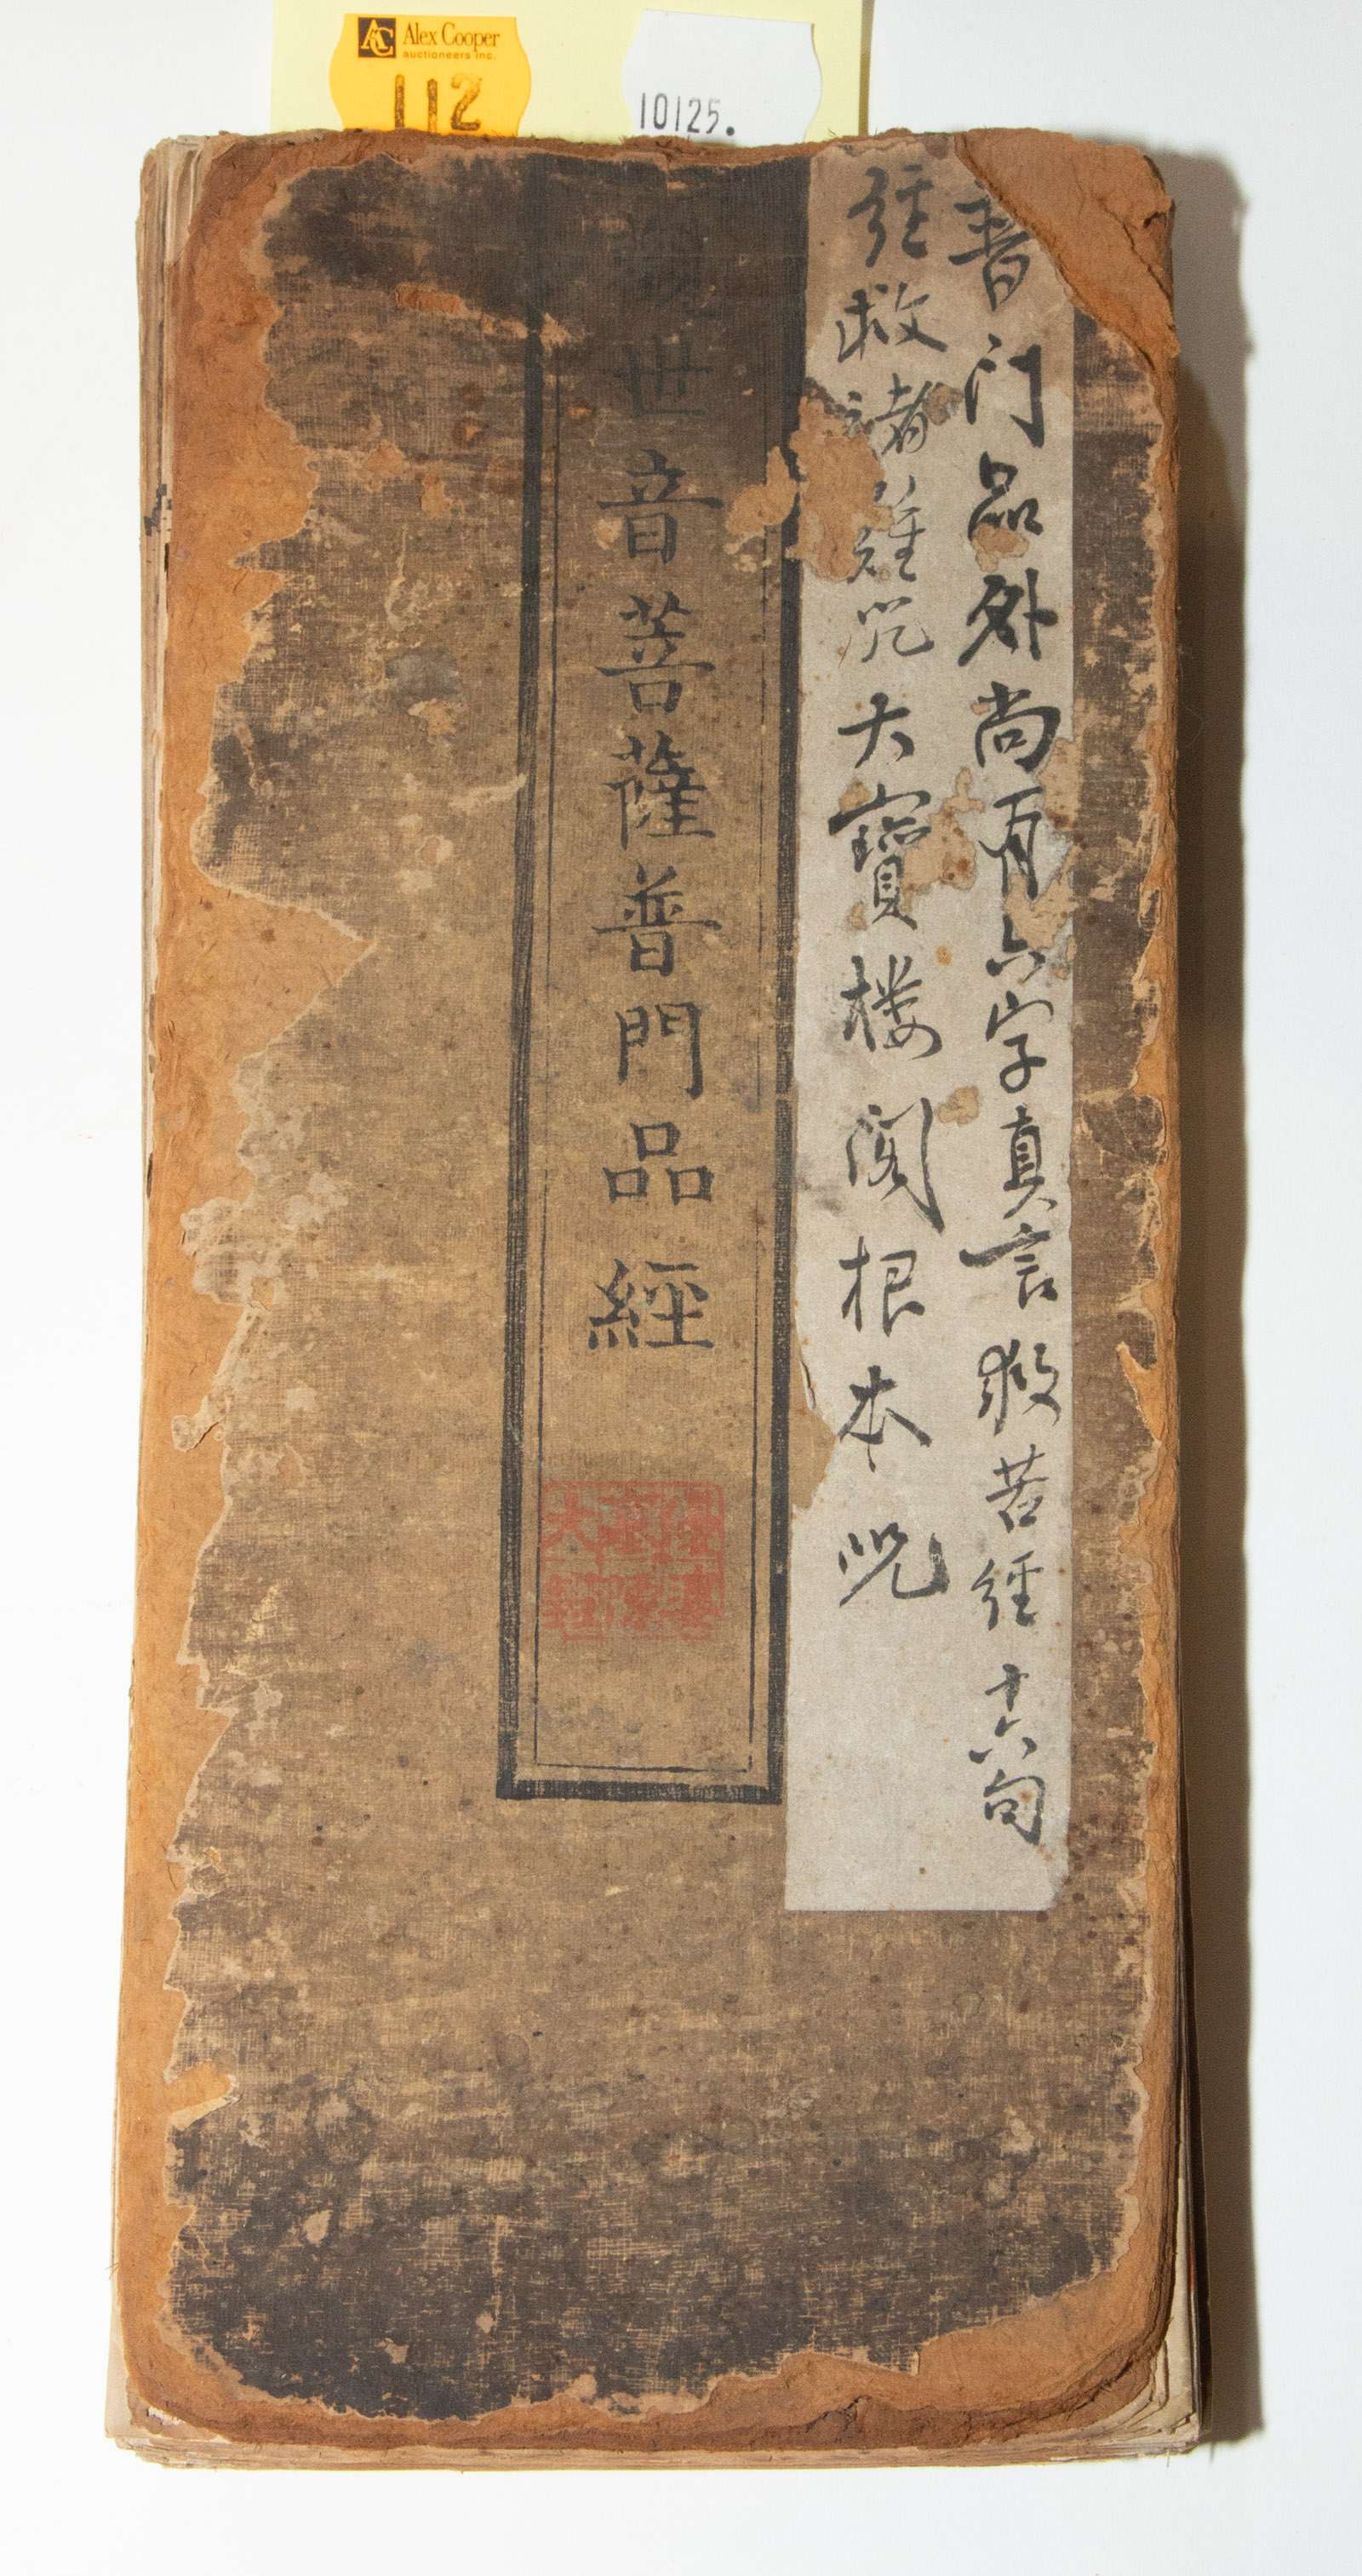 RARE CHINESE XYLOGRAPHIC BOOK  338a56